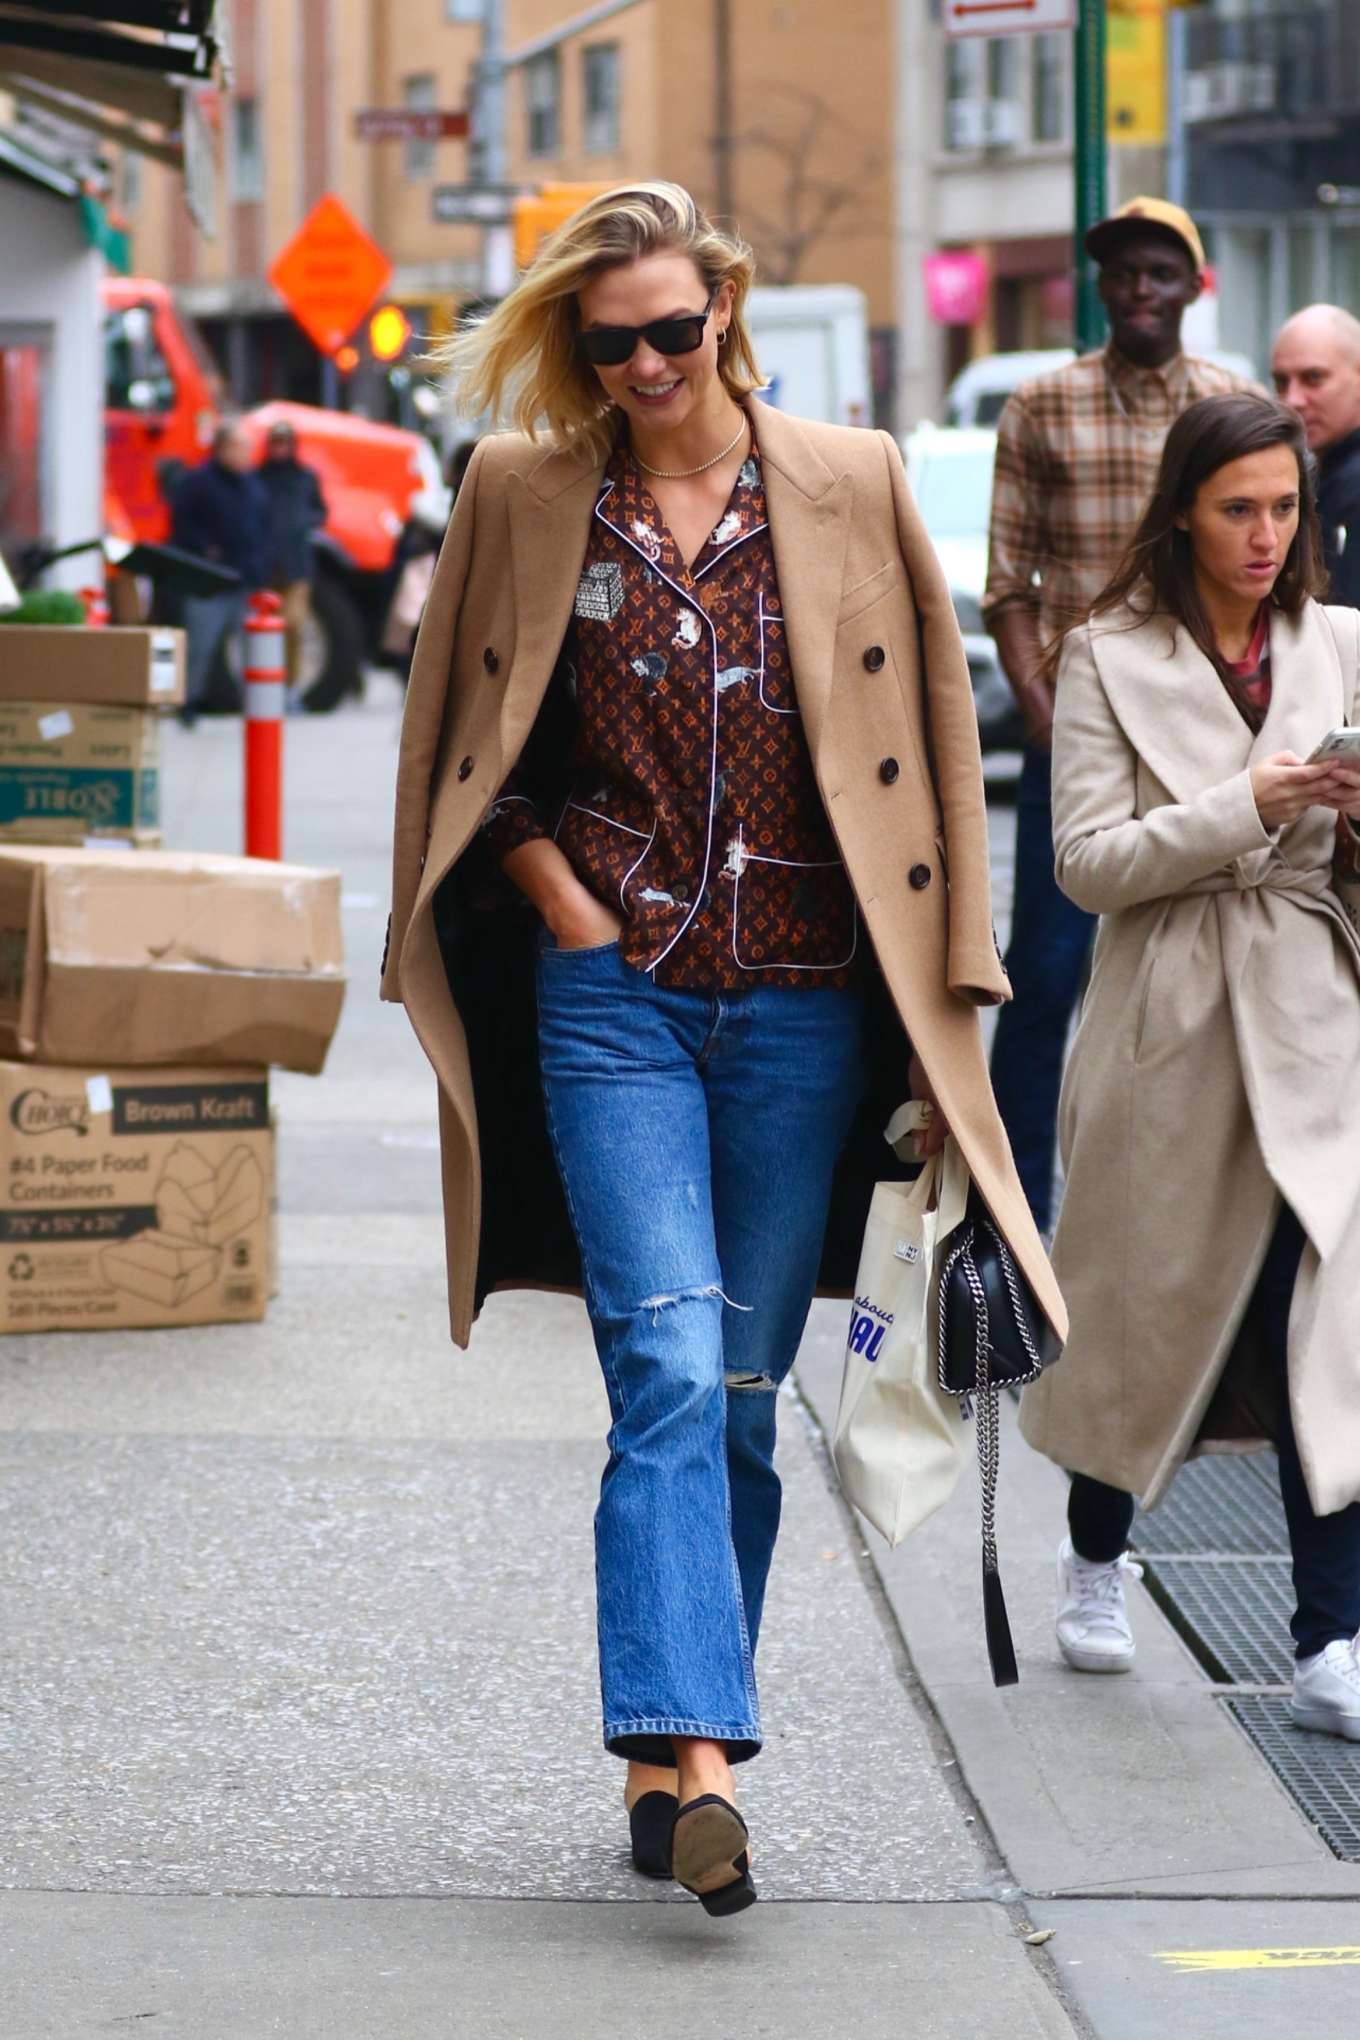 Karlie Kloss 2020 : Karlie Kloss in Ripped Jeans – Out in New York City-04